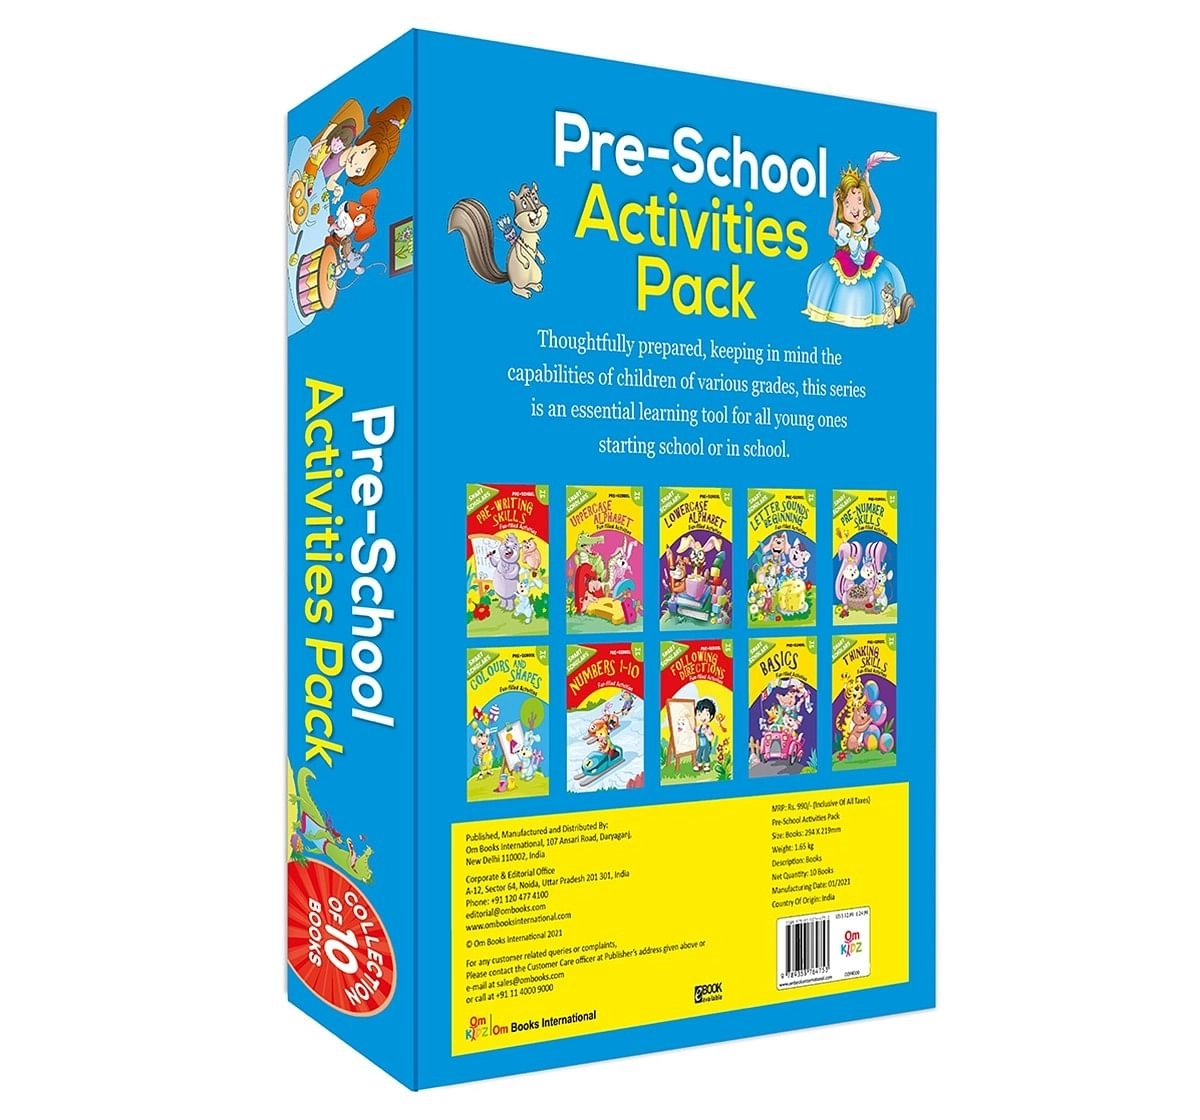 Pre-School Activities Pack Smart Scholars, 320 Pages Book By Om Books Editorial Team, Paperback ( Collection Of 10 Books)